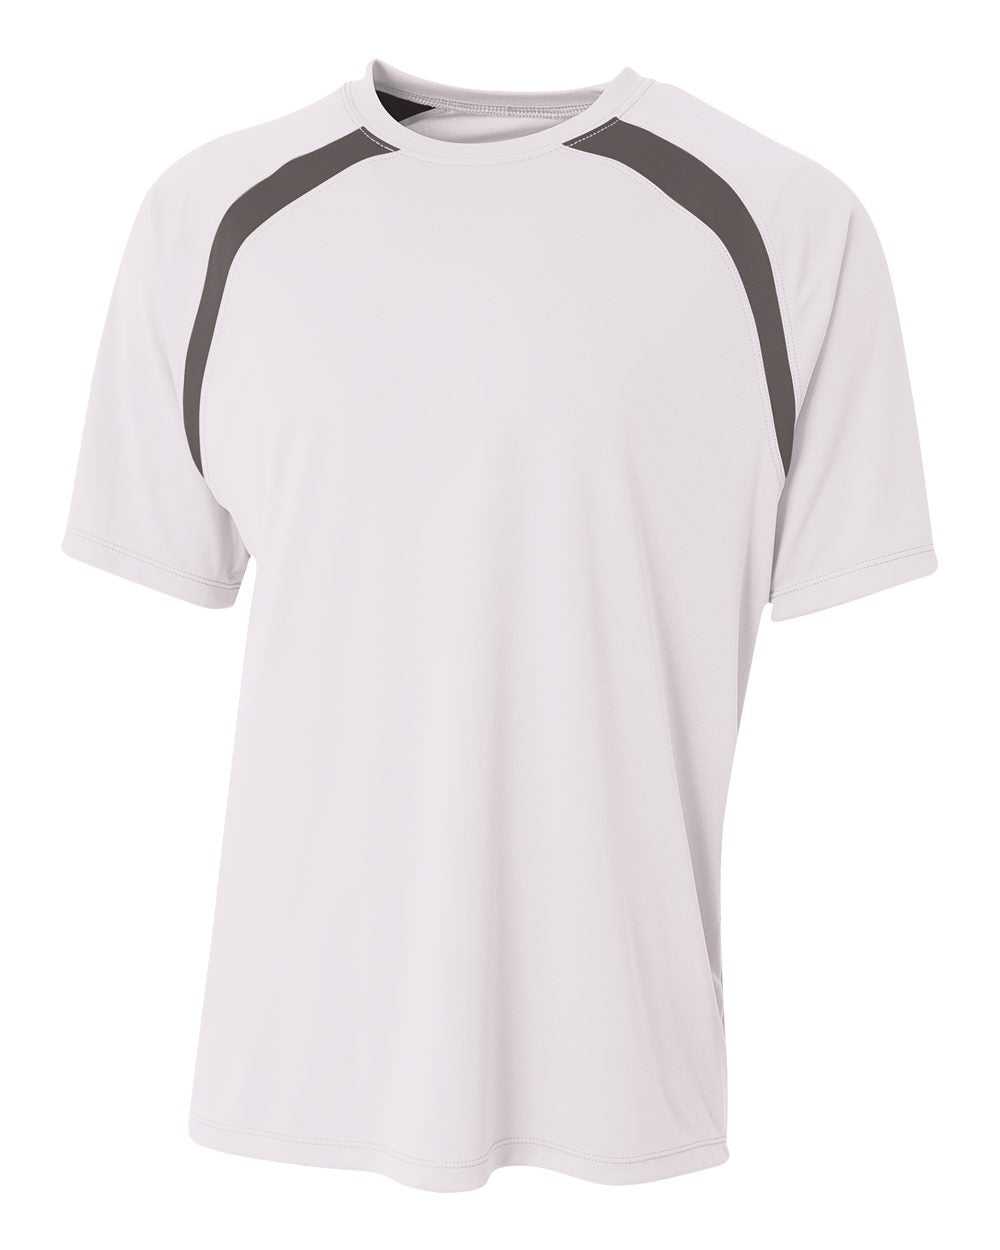 A4 N3001 Spartan Short Sleeve Color Block Crew - White Graphite - HIT a Double